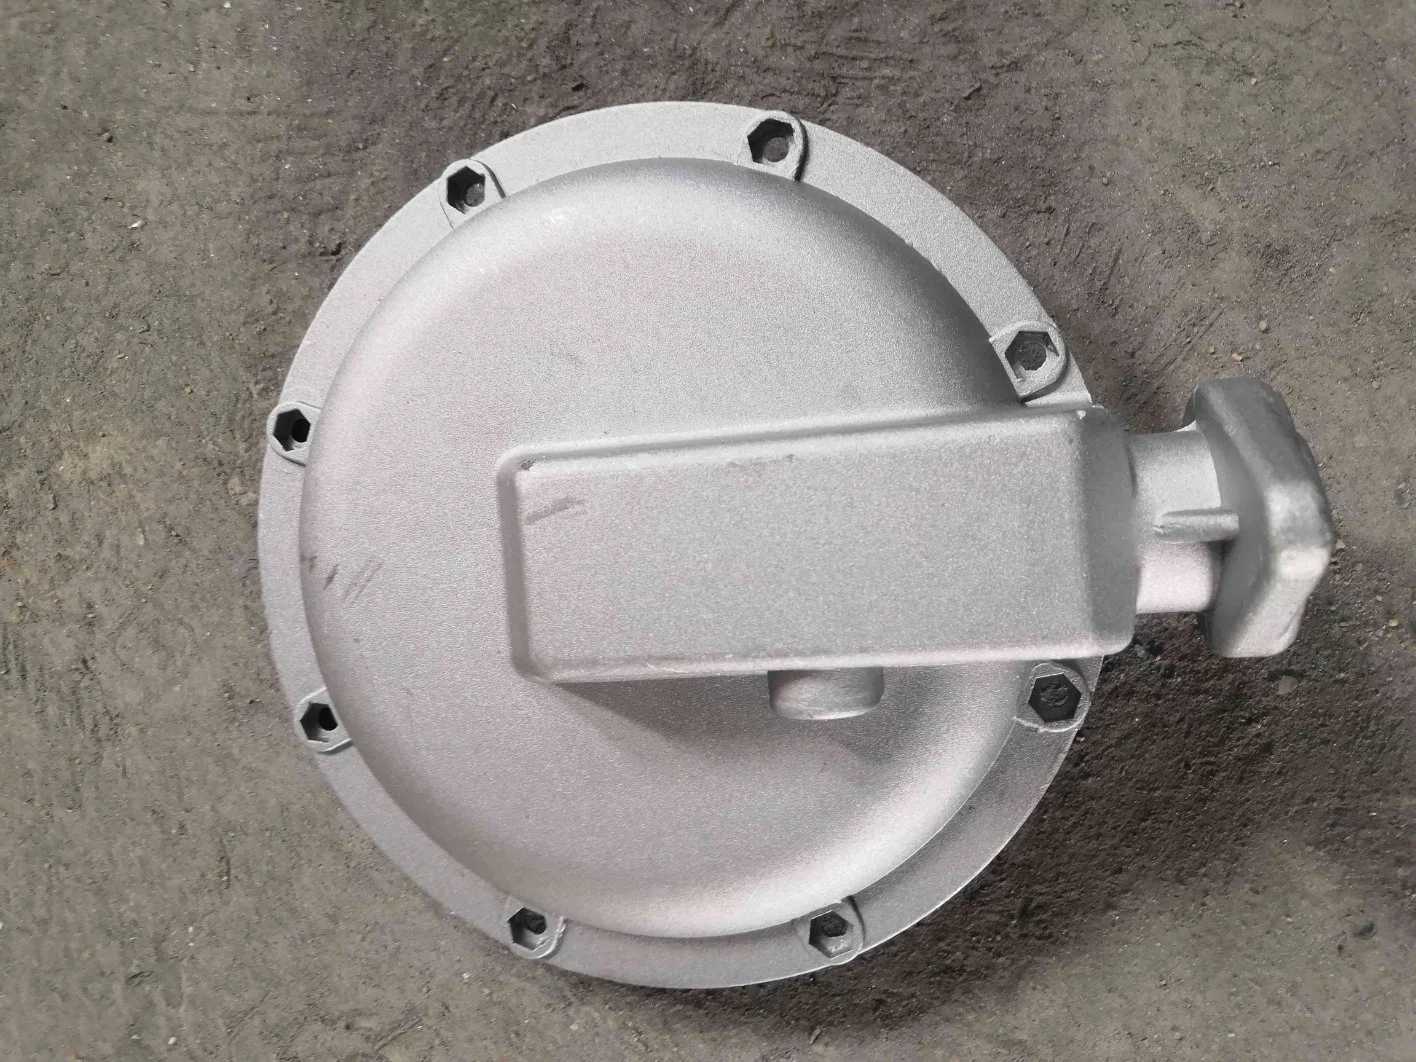 Spray Coating Anodized Aluminum Die Casting for LED Lights Shell